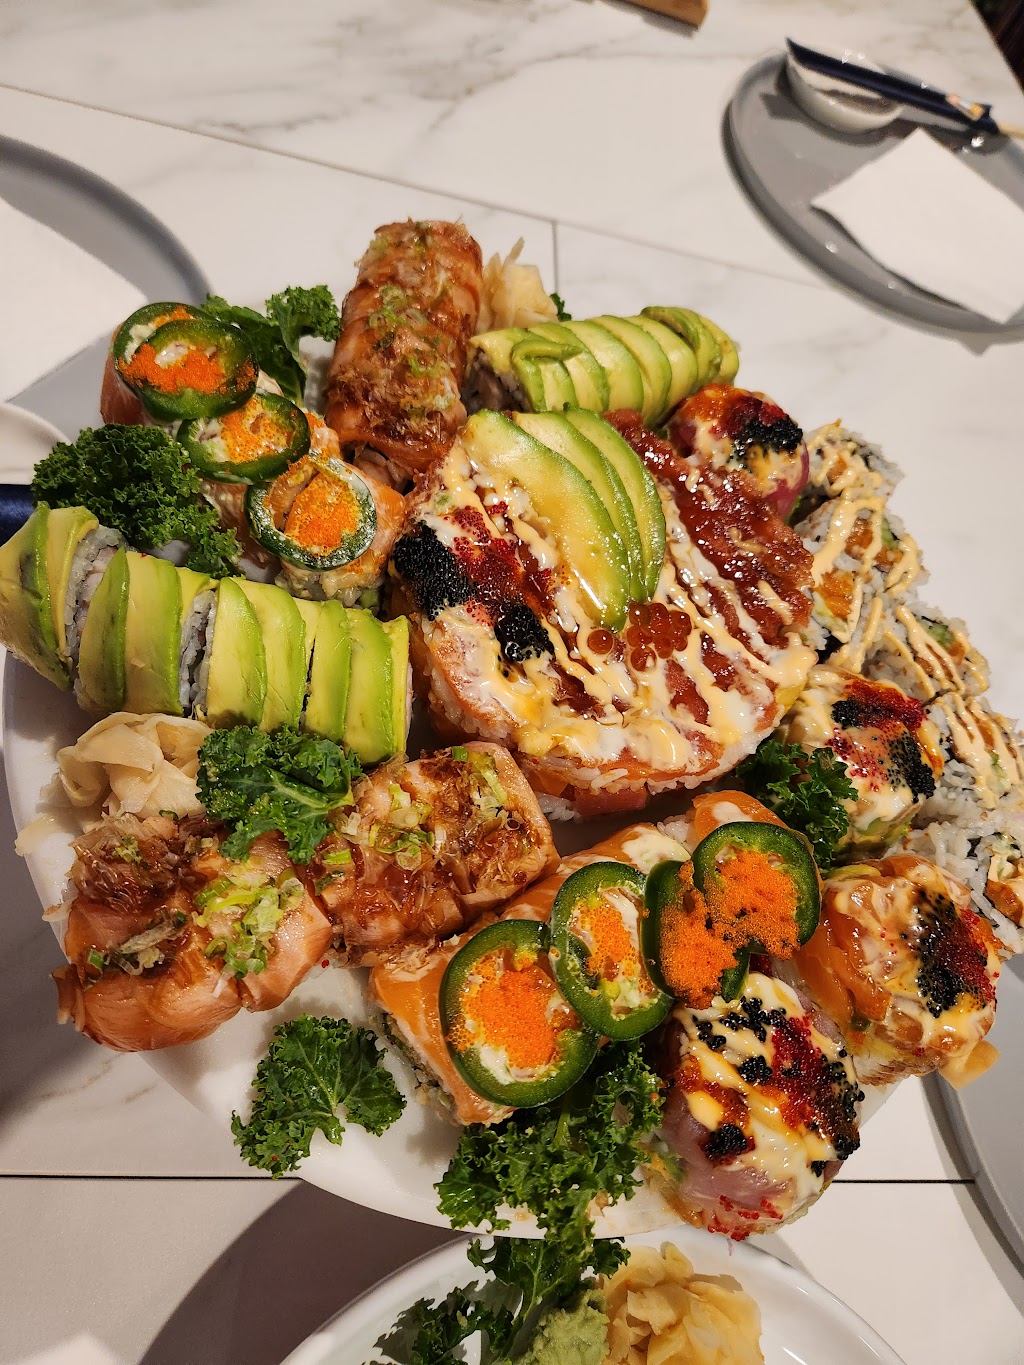 Star Sushi and Cuisine | 1400 Anderson Ave #2, Fort Lee, NJ 07024 | Phone: (201) 267-0527